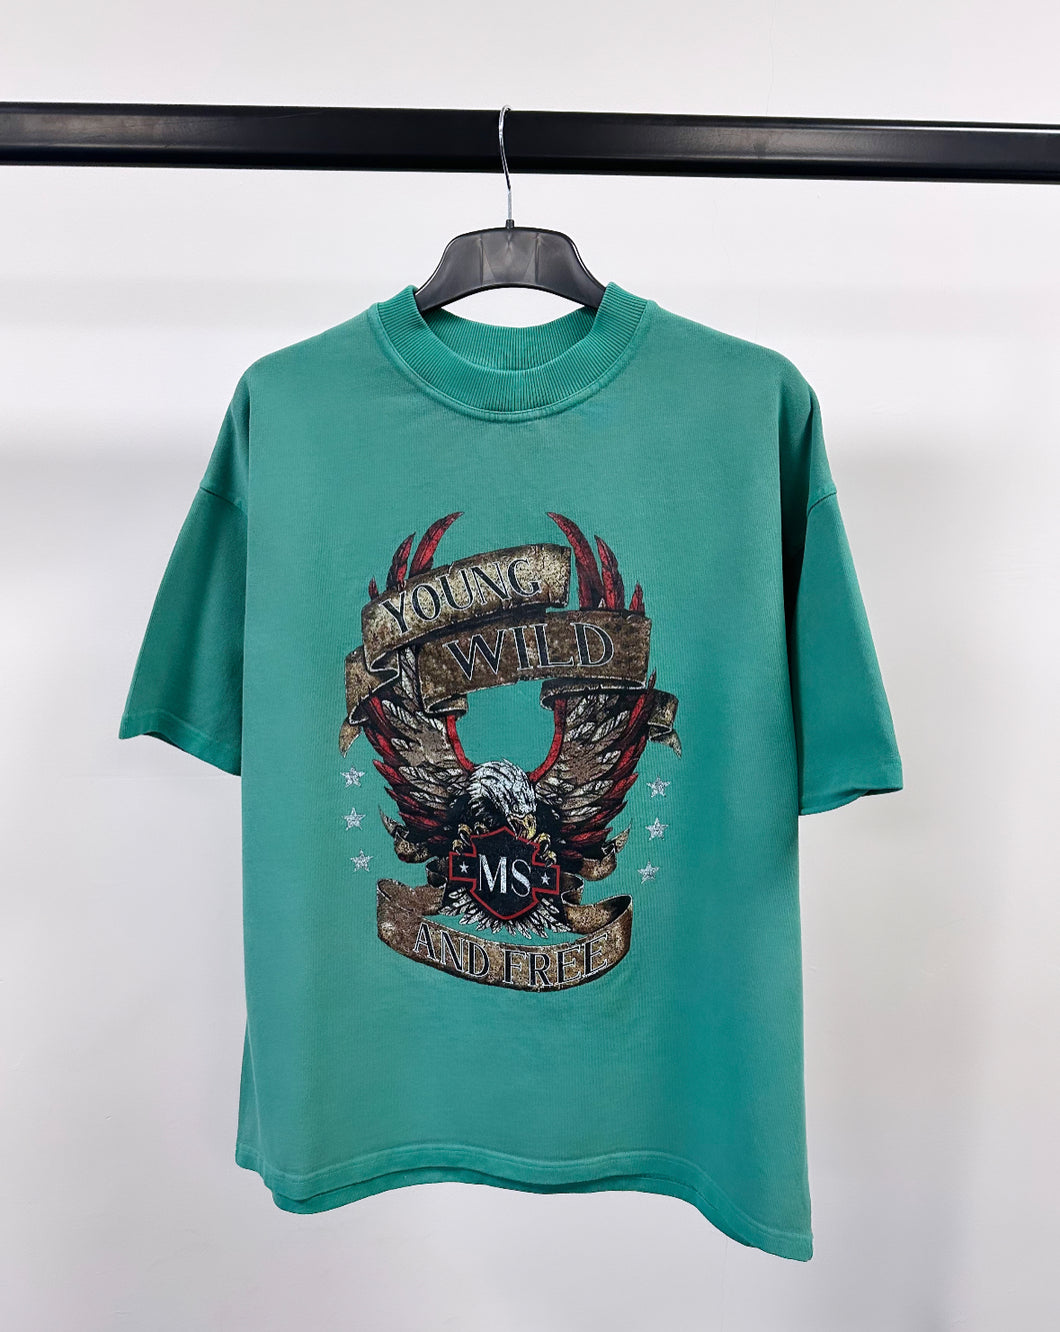 Washed Teal Eagle Heavyweight T-shirt.